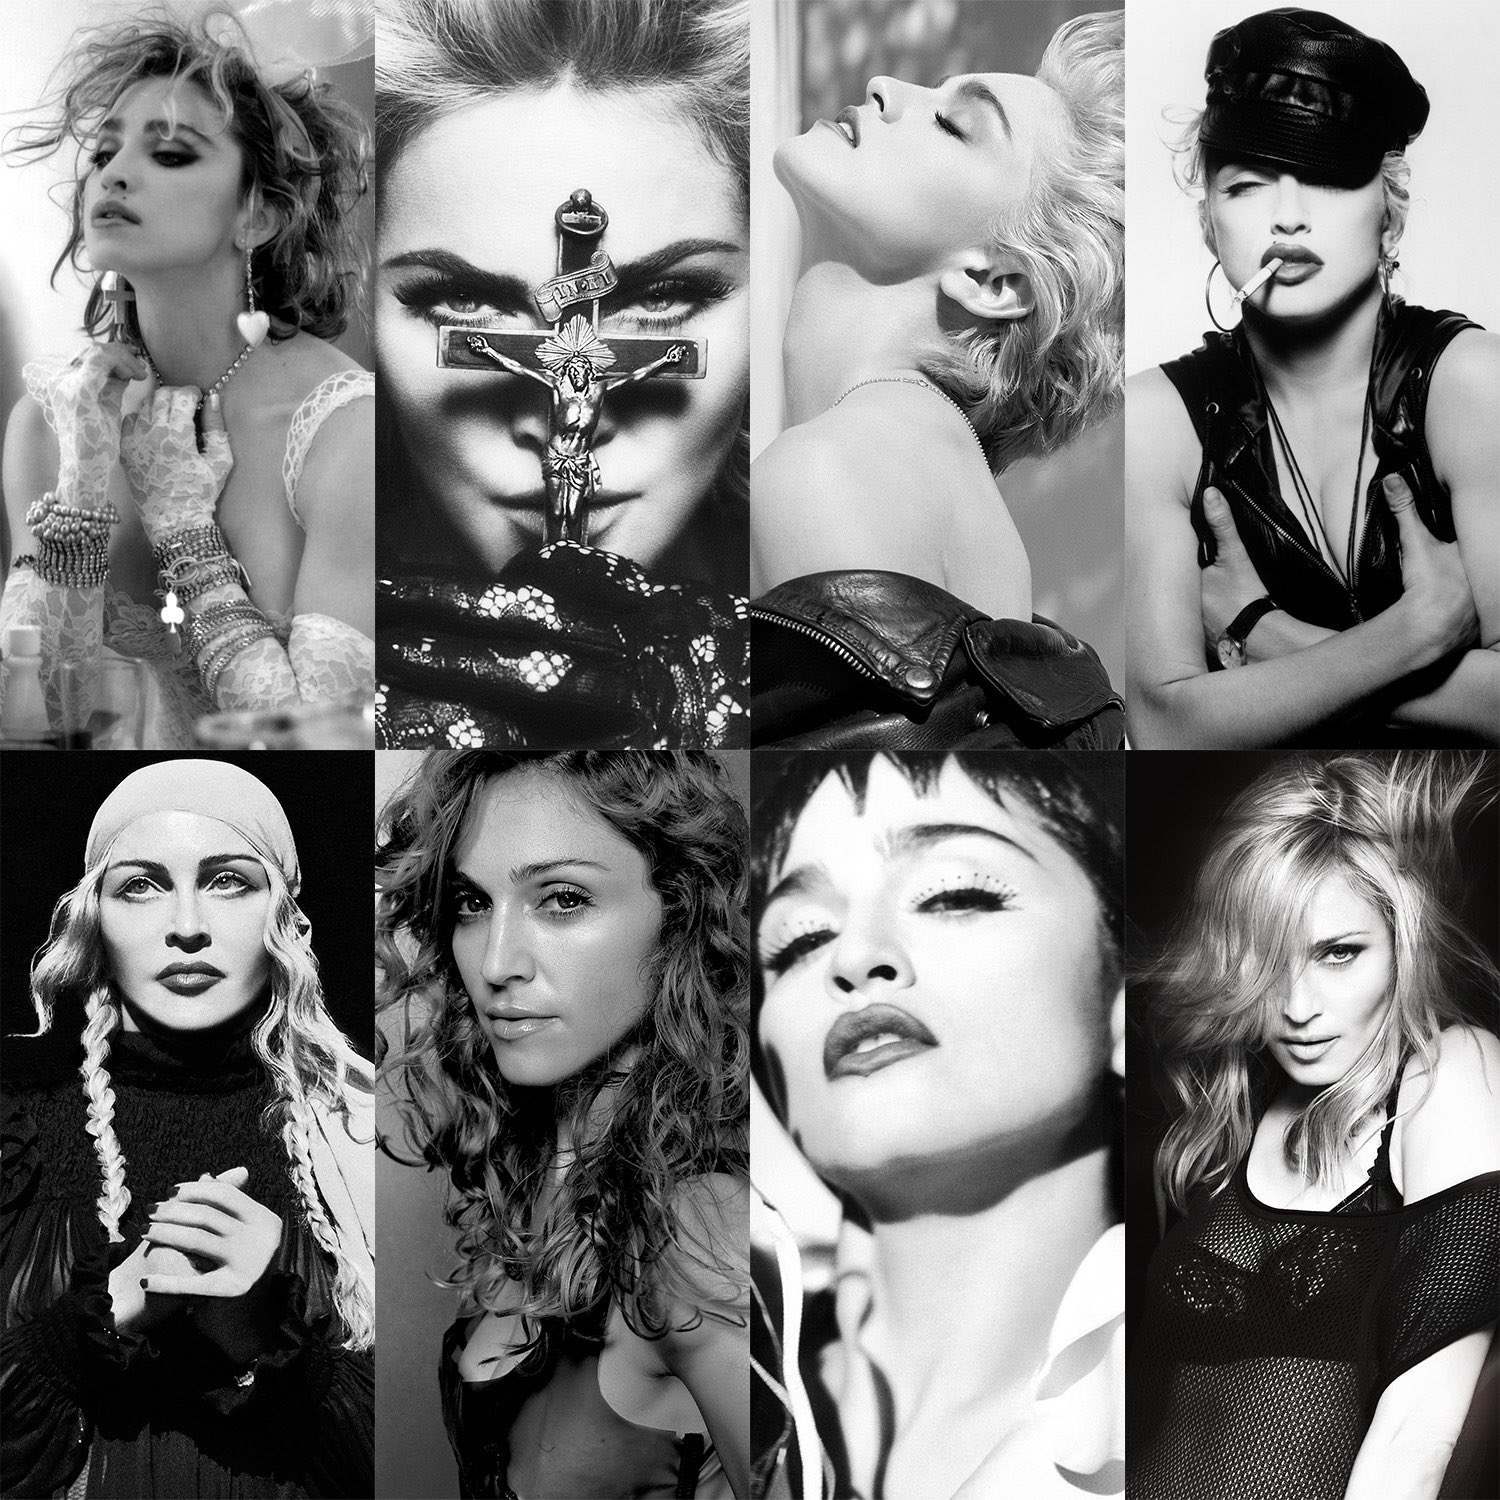 Madonna / Physical deluxe reissues confirmed for 2022 and beyond